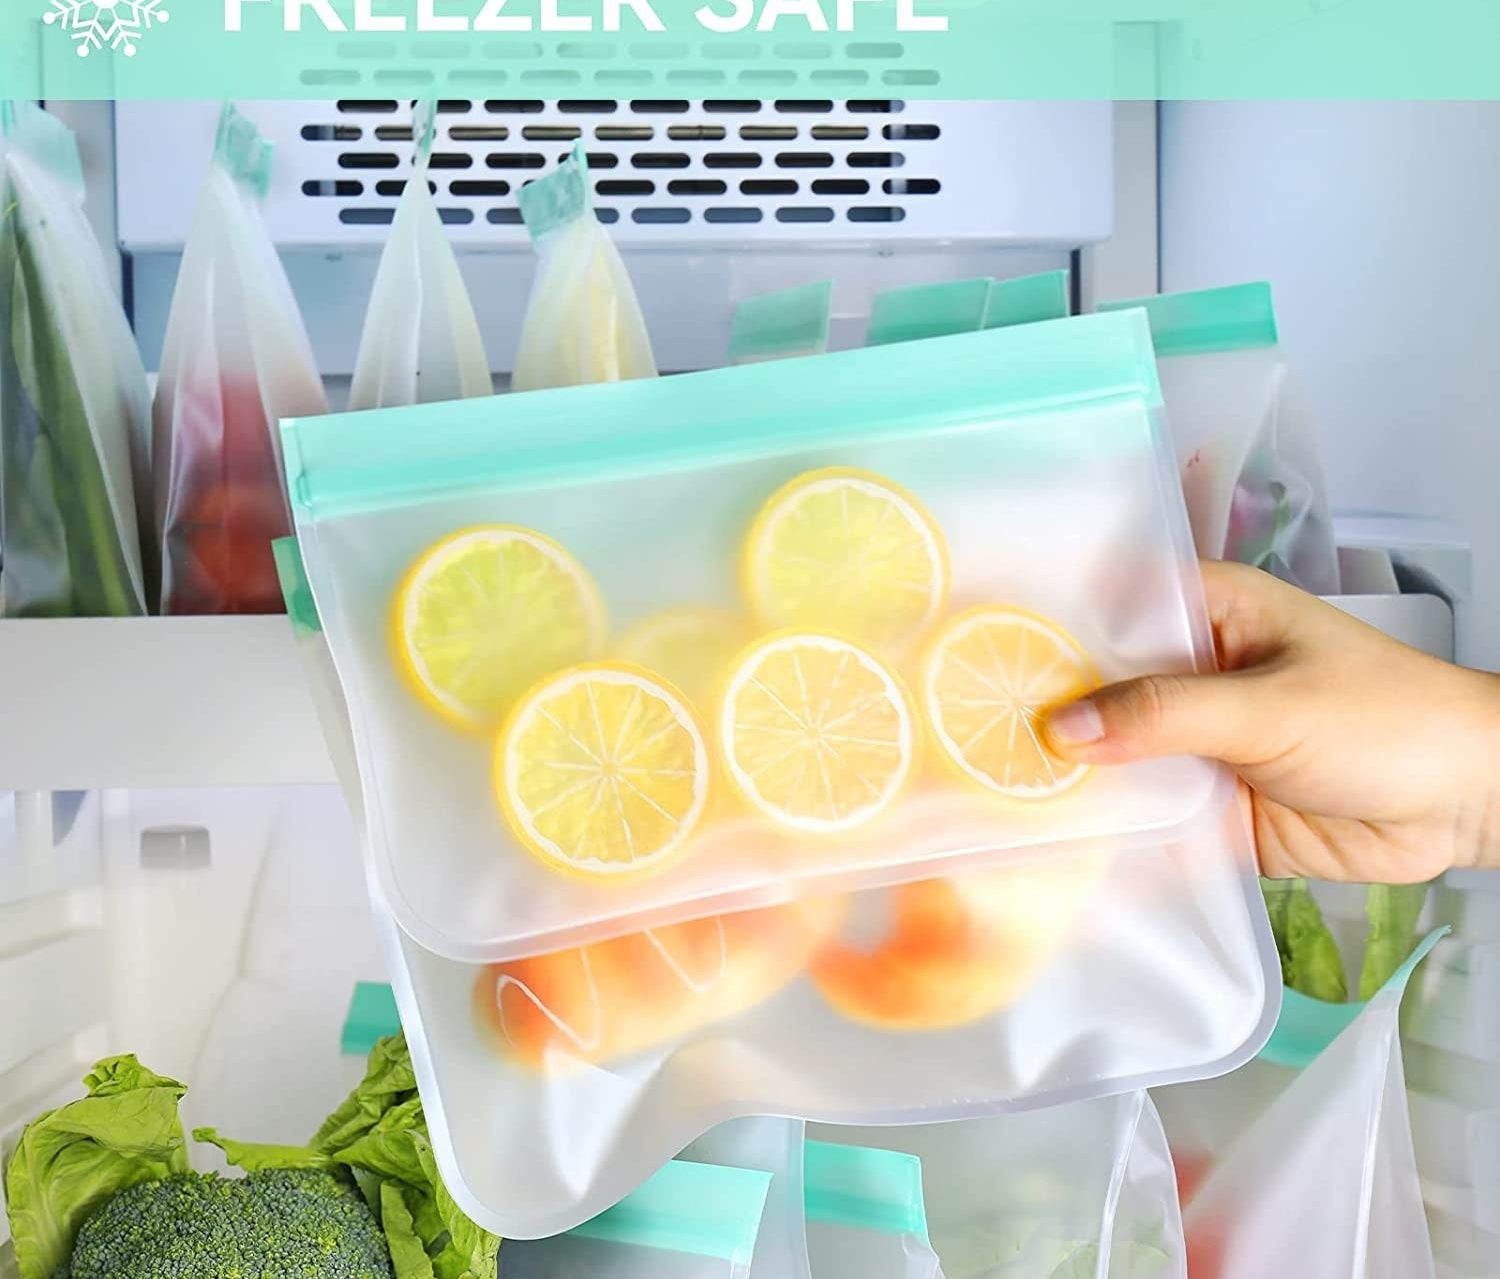 person holding the bags with lemon and other ingredients in it in front of a freezer